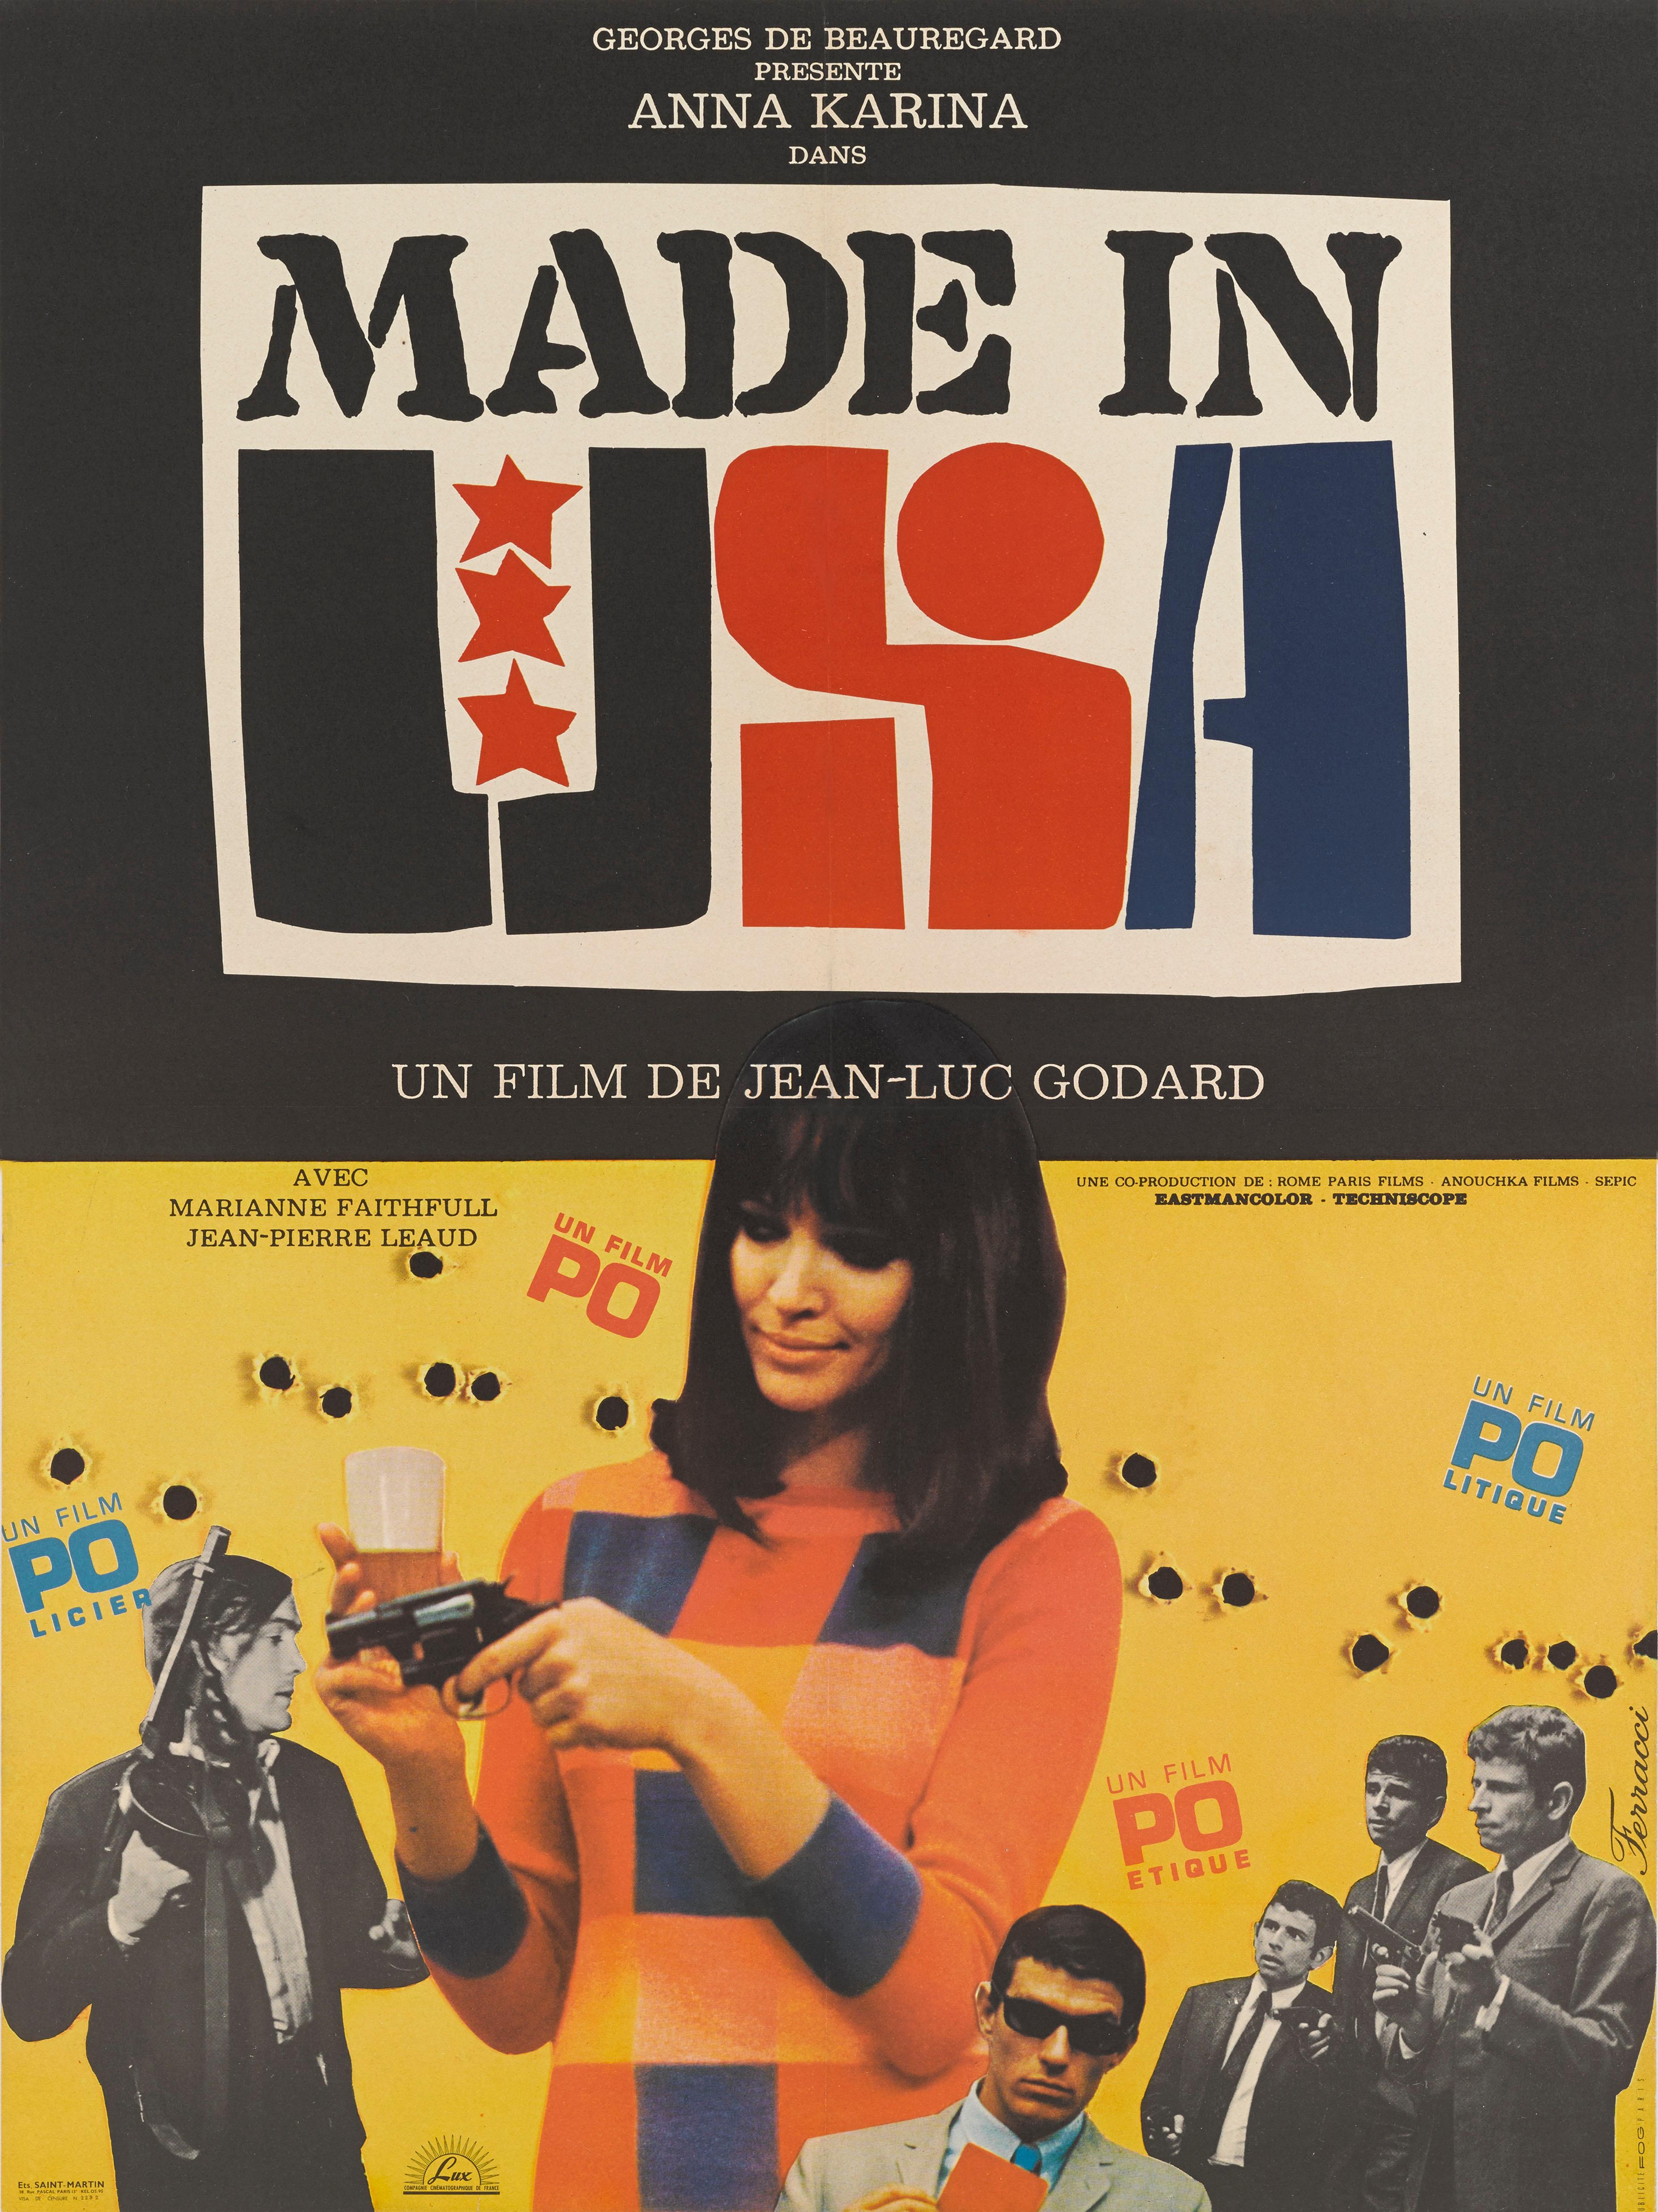 Original French film poster from the 1966 French New Wave film.
This film was directed by Jean-Luc Godard and starred Anna Karina, Jean-Pierre Leaud.
The art work on this poster is by the French poster artist Rene Ferracci (1927-1982) 
This